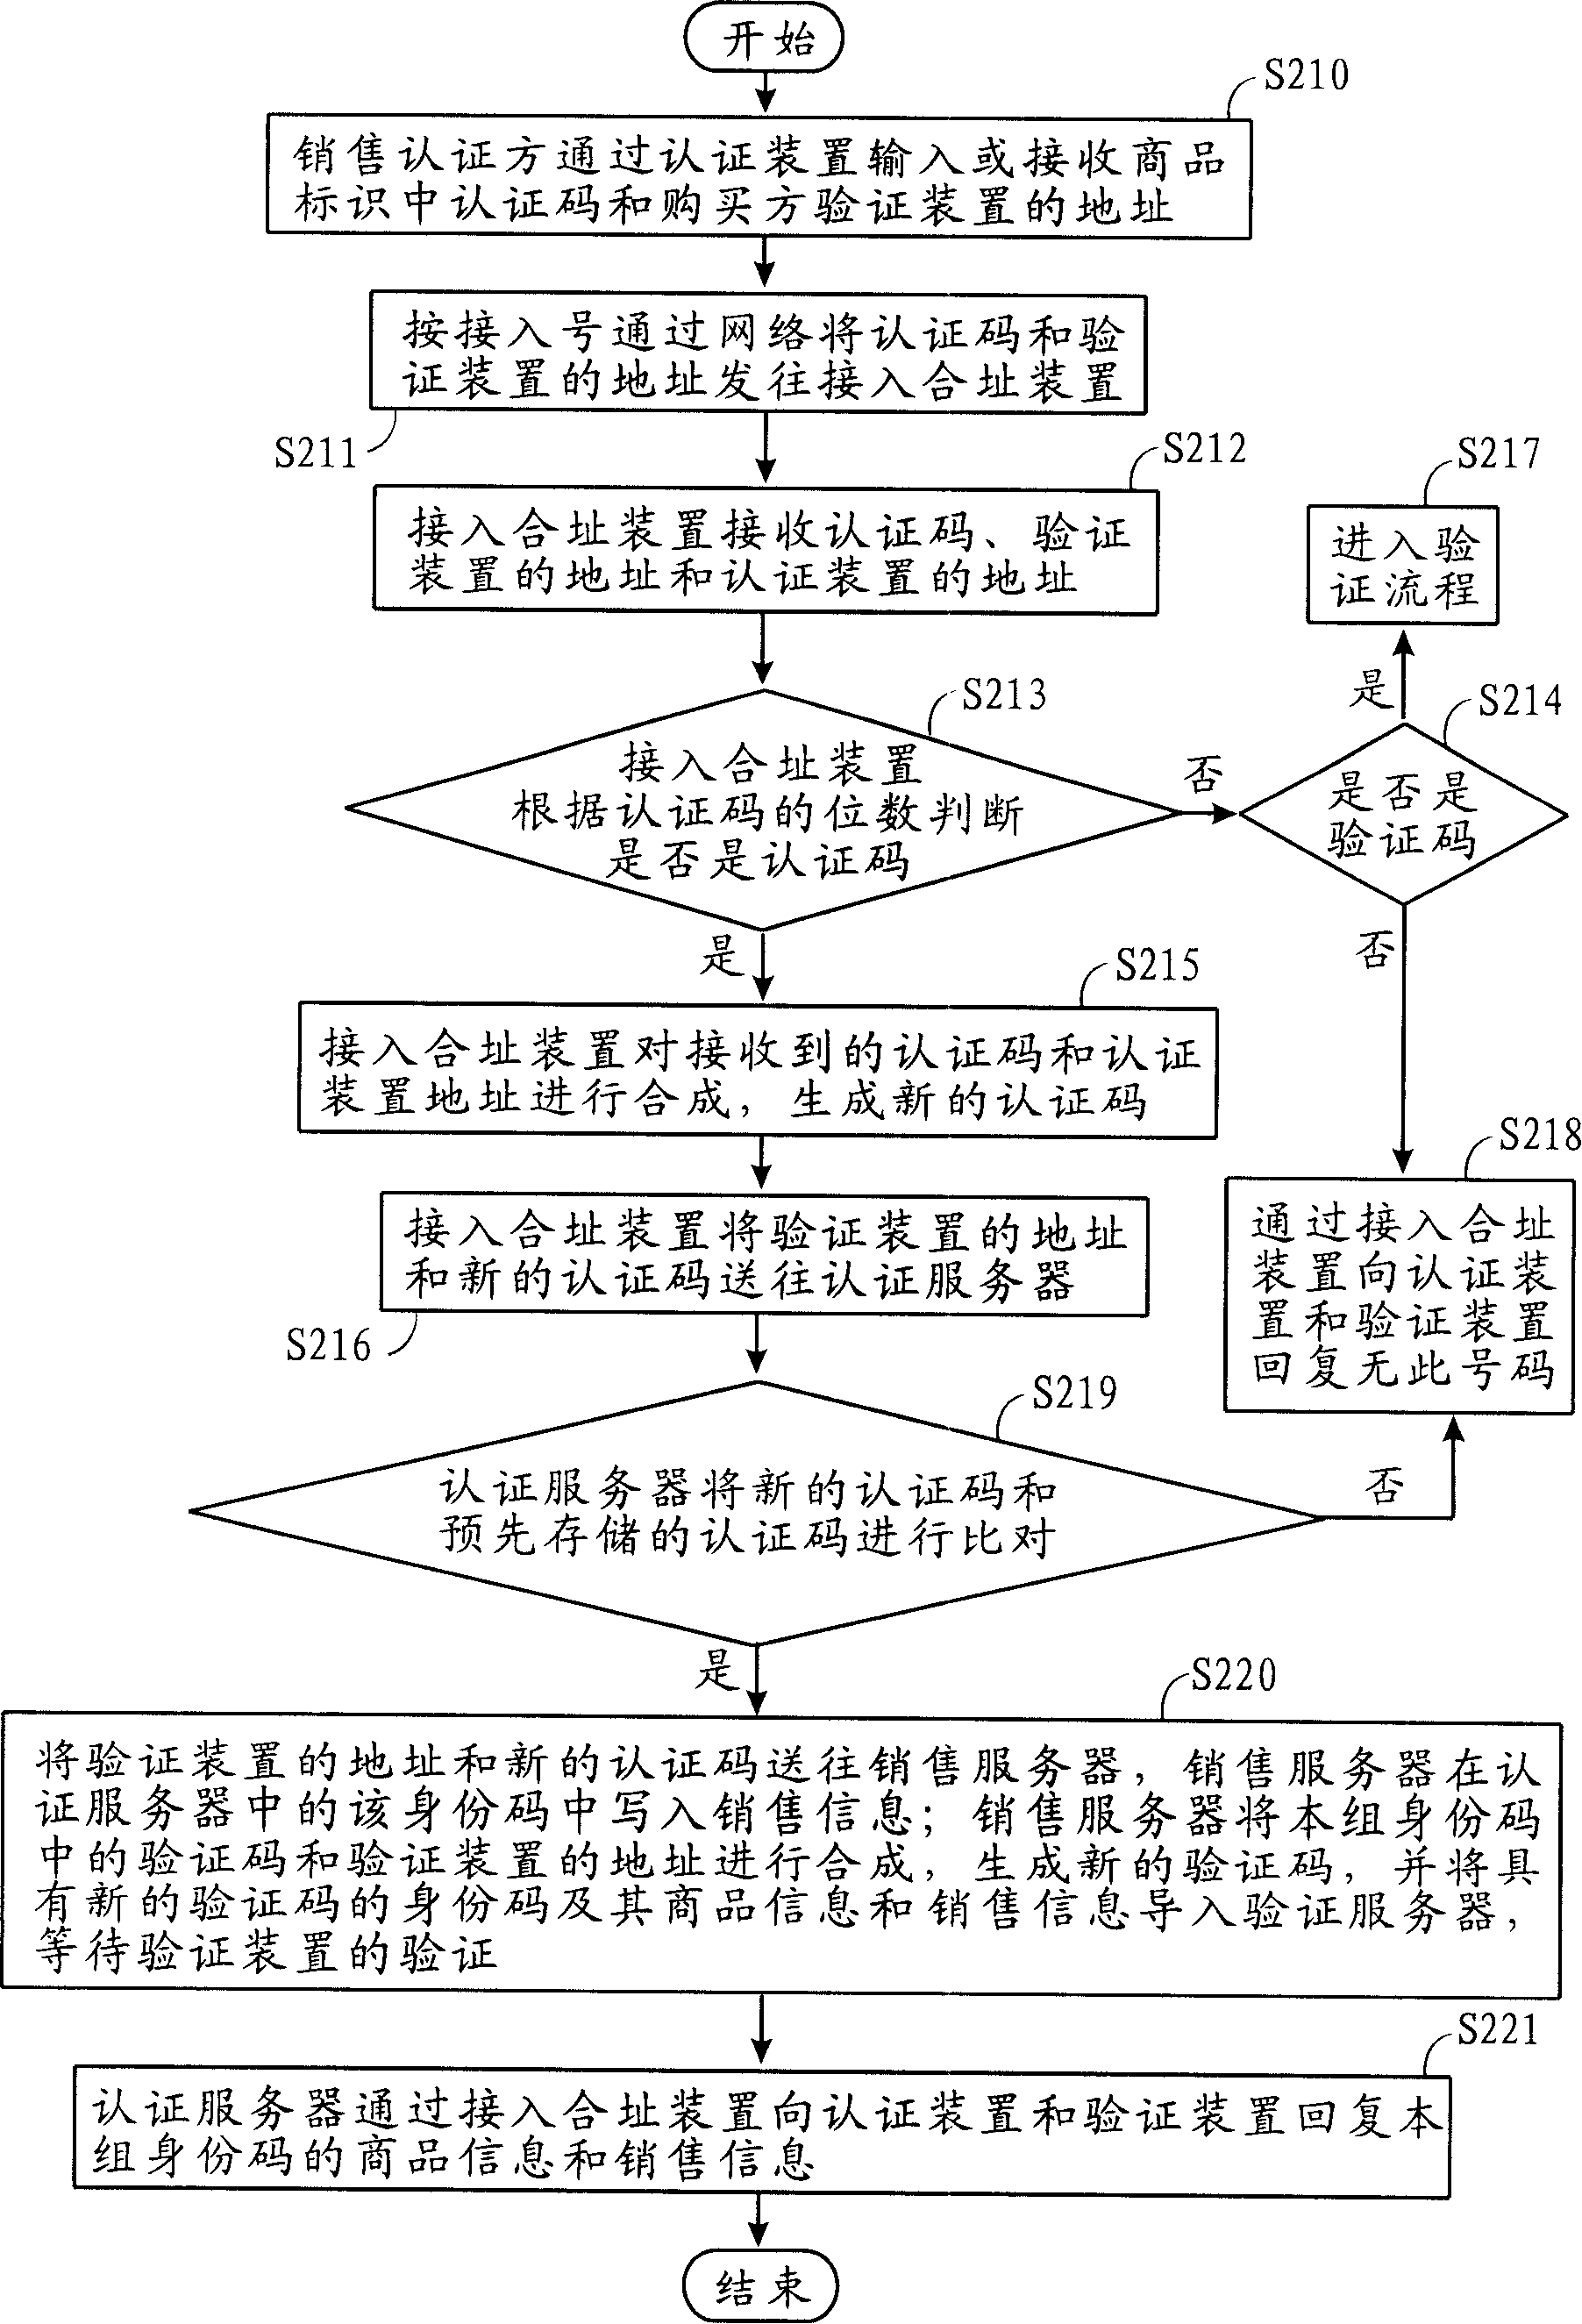 Automatic identification device for combined address identification